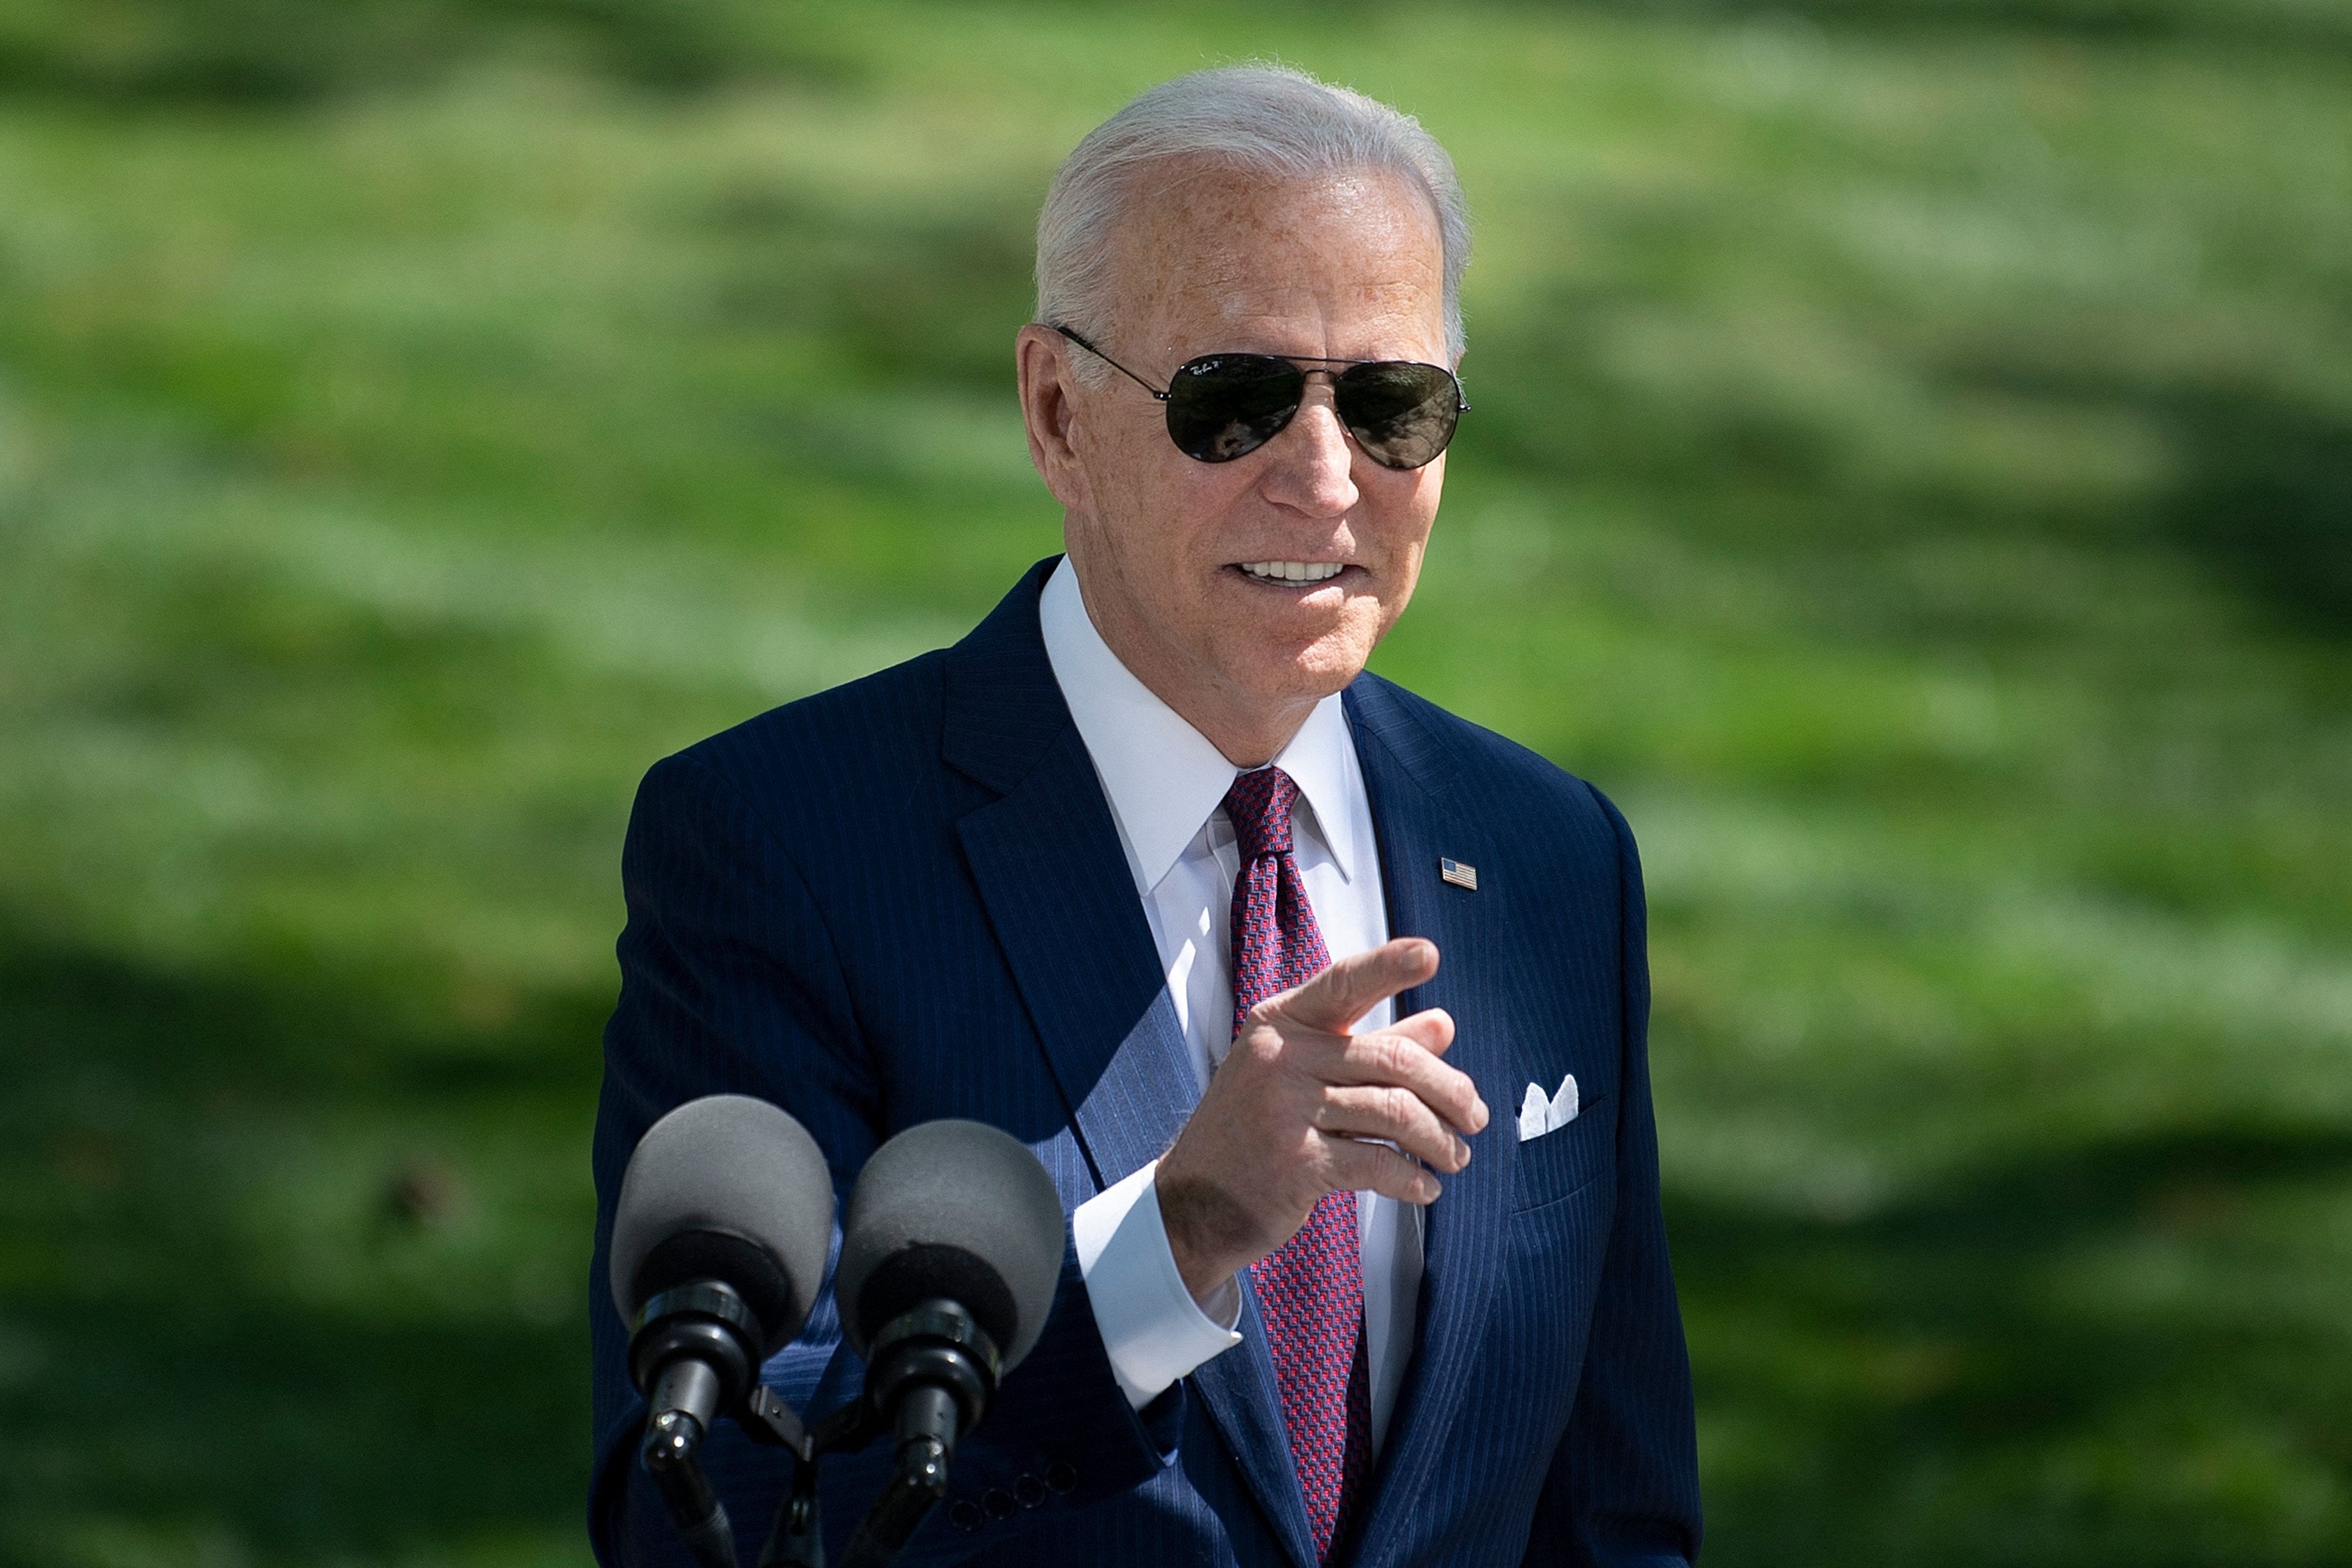 Geometri gift unse Biden's ubiquitous shades are showing up at White House functions